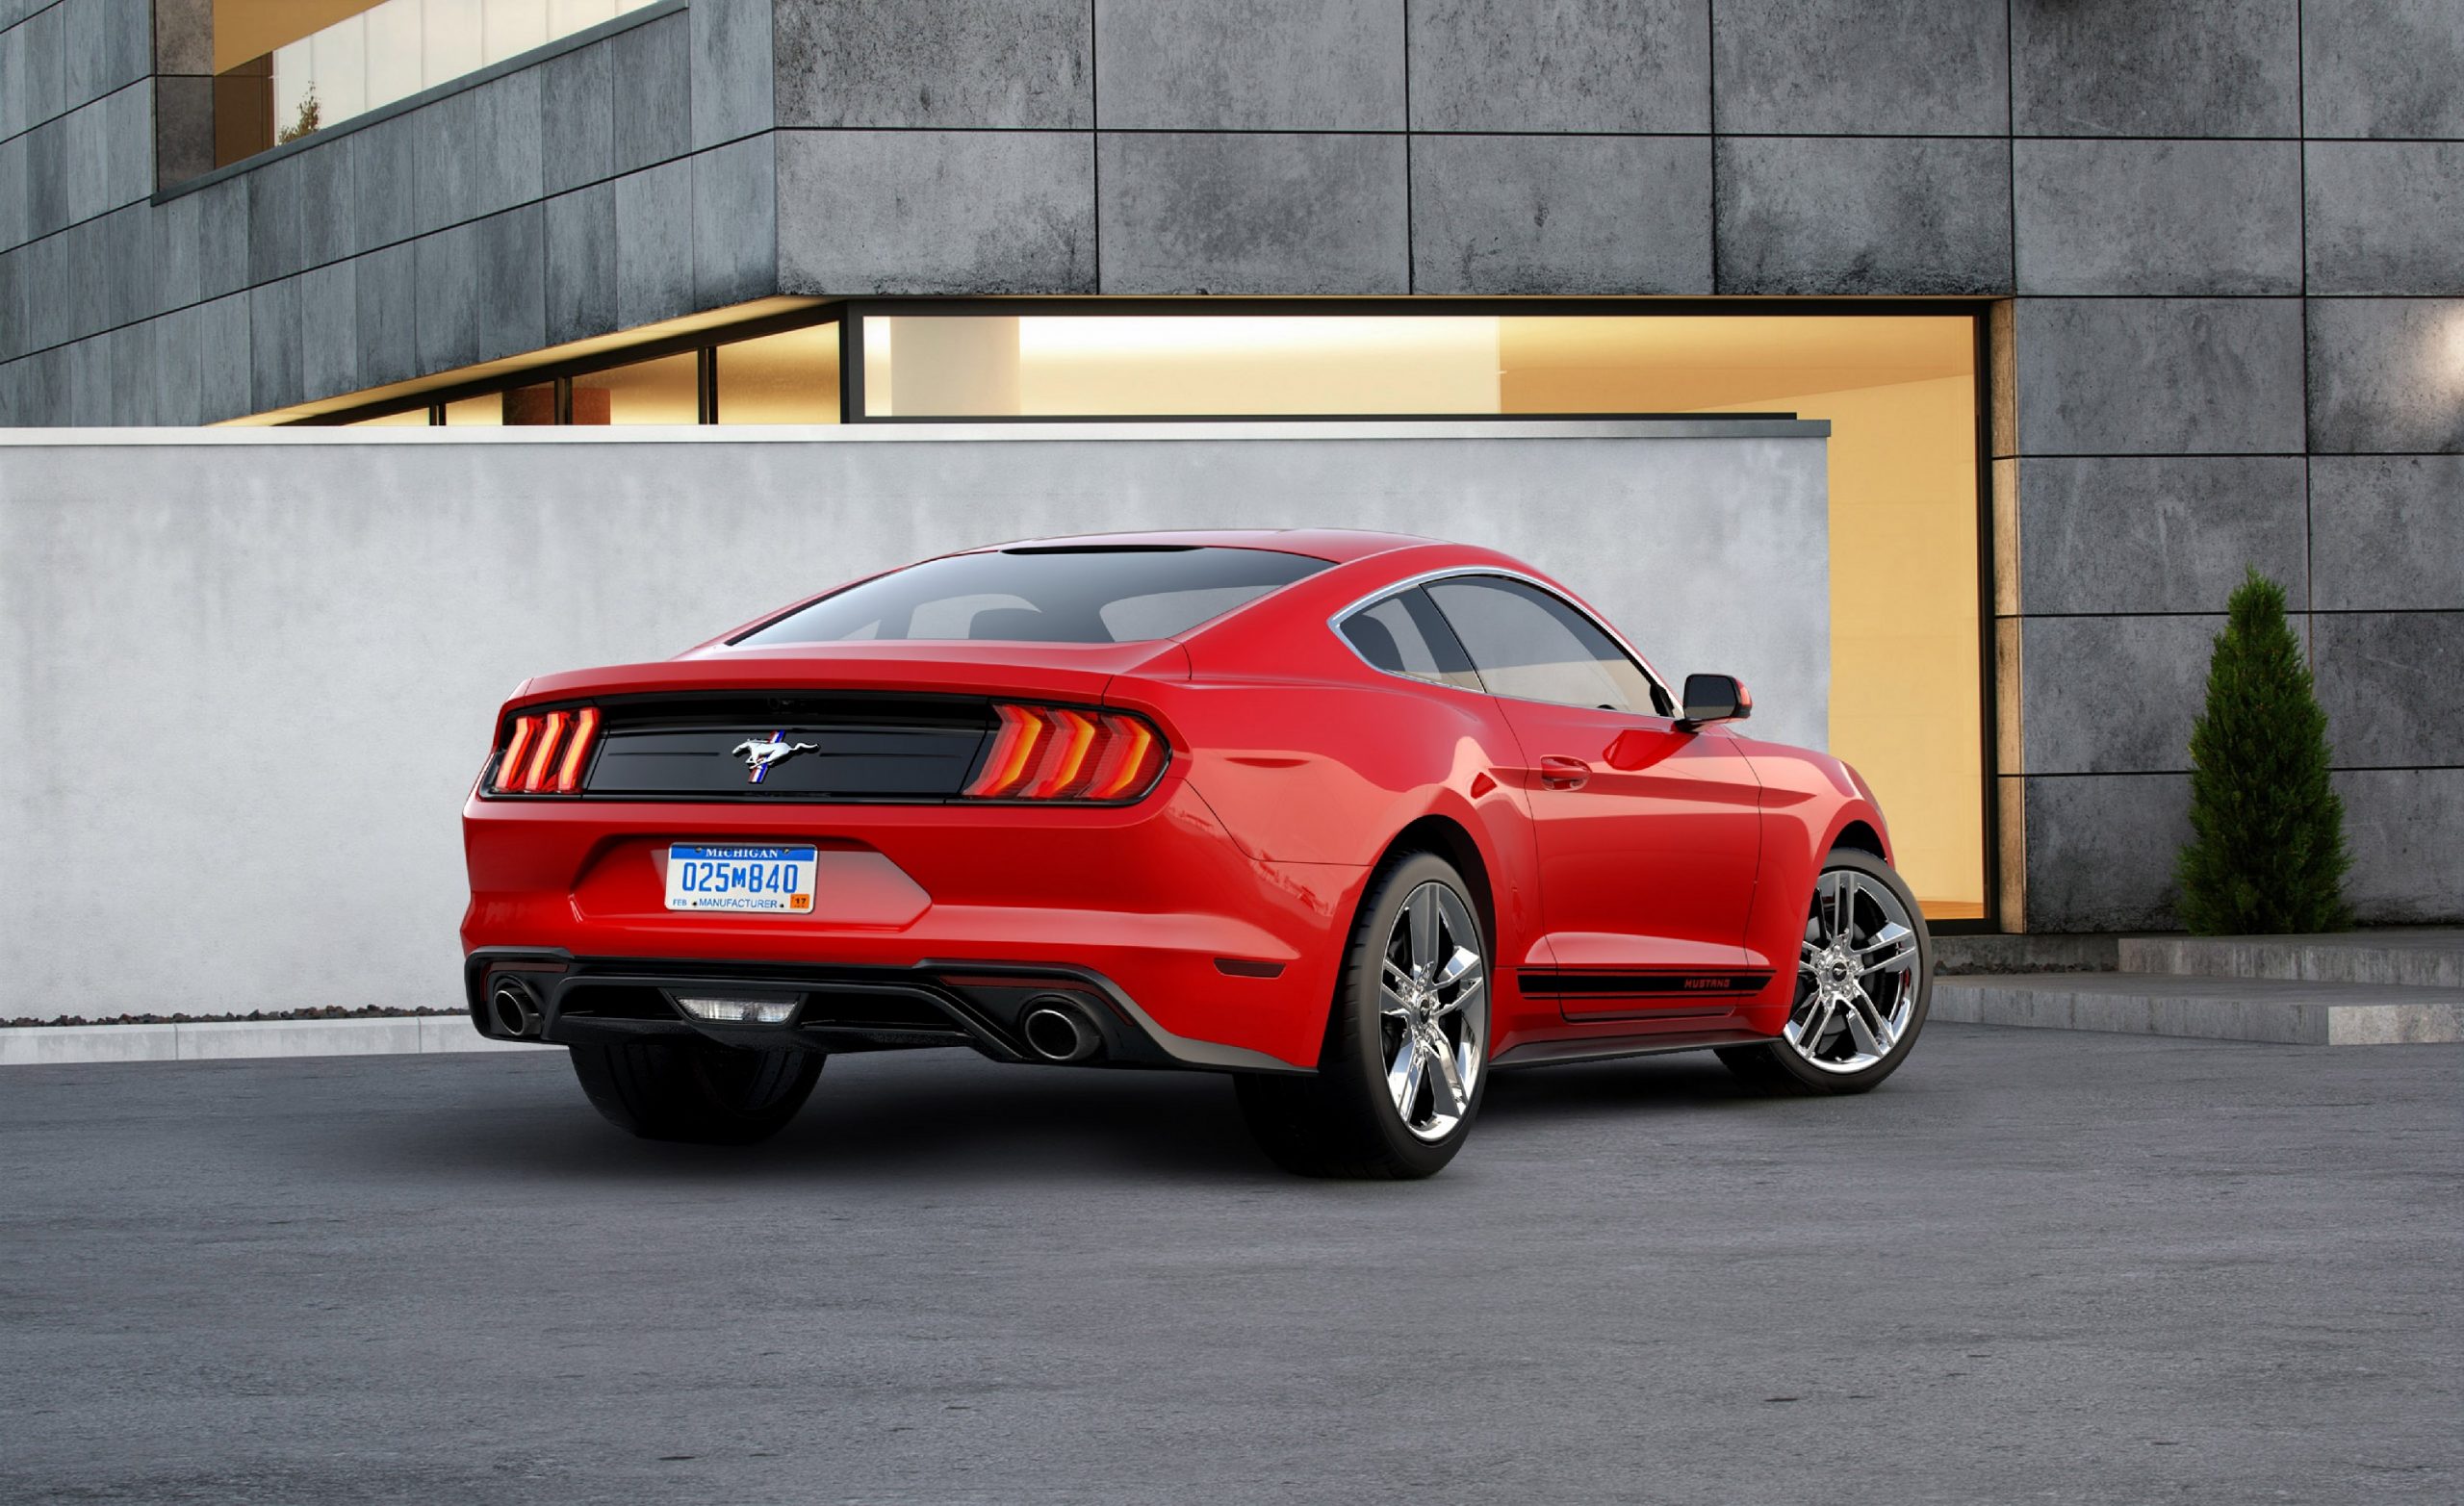 The rear 3/4 of a red Ford Mustang Pony Pack